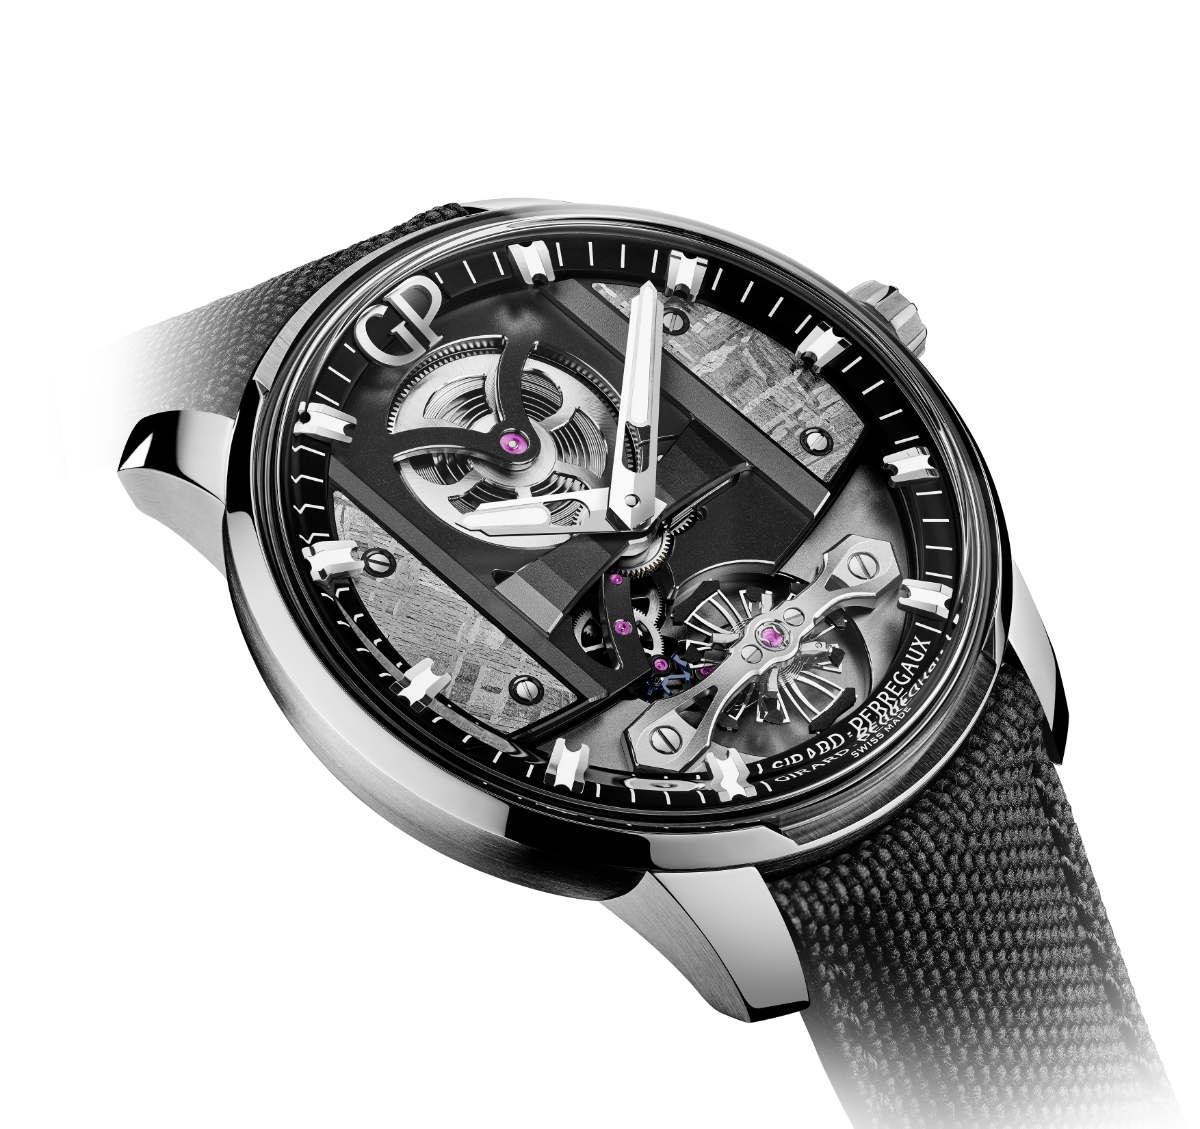 Girard-Perregaux Unveils Its New Free Bridge Meteorite Watch - Out Of This World